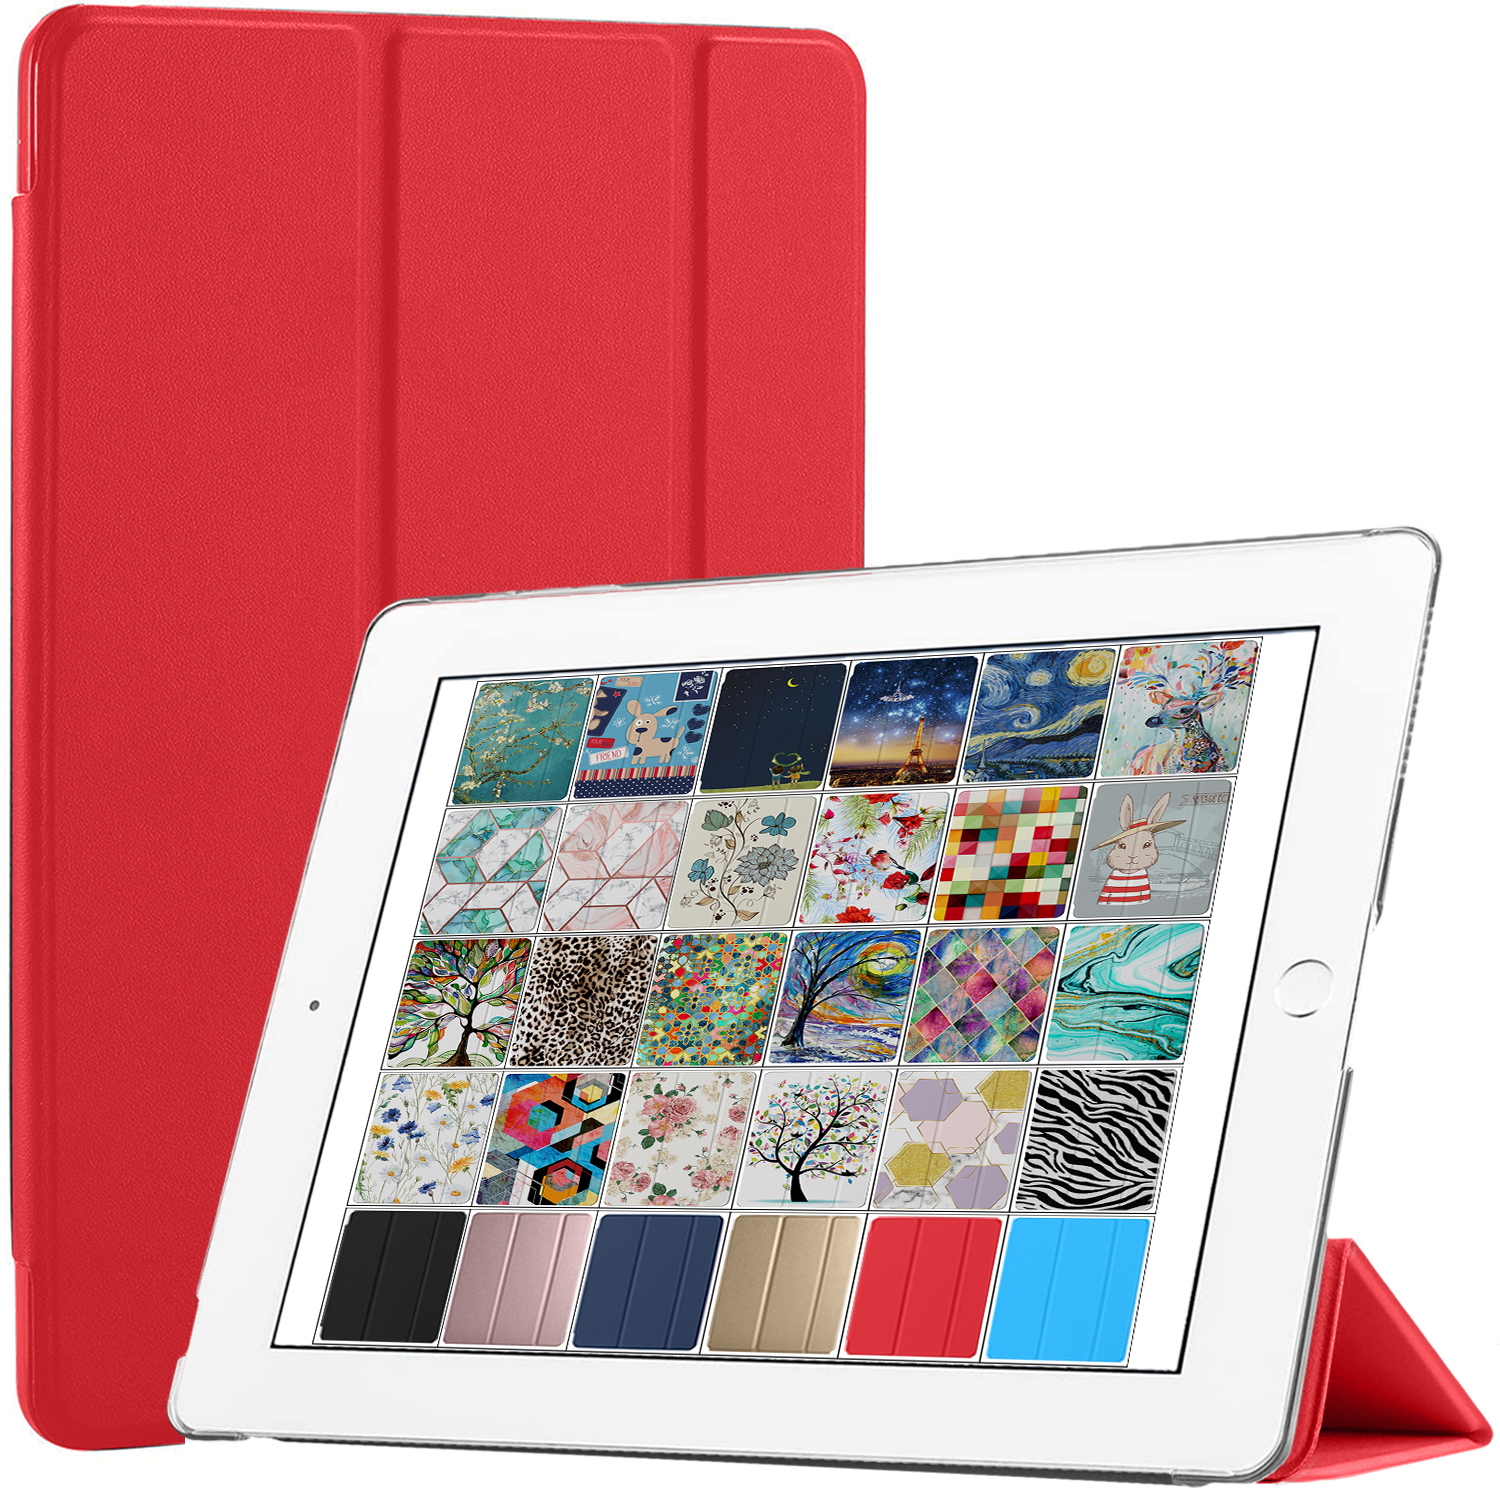 DuraSafe Cases For iPad Mini 5 Generation 2019 - 7.9 Inch Slimline Series Lightweight Protective Cover with Dual Angle Stand & Froasted PC Back Shell - Red - image 1 of 6